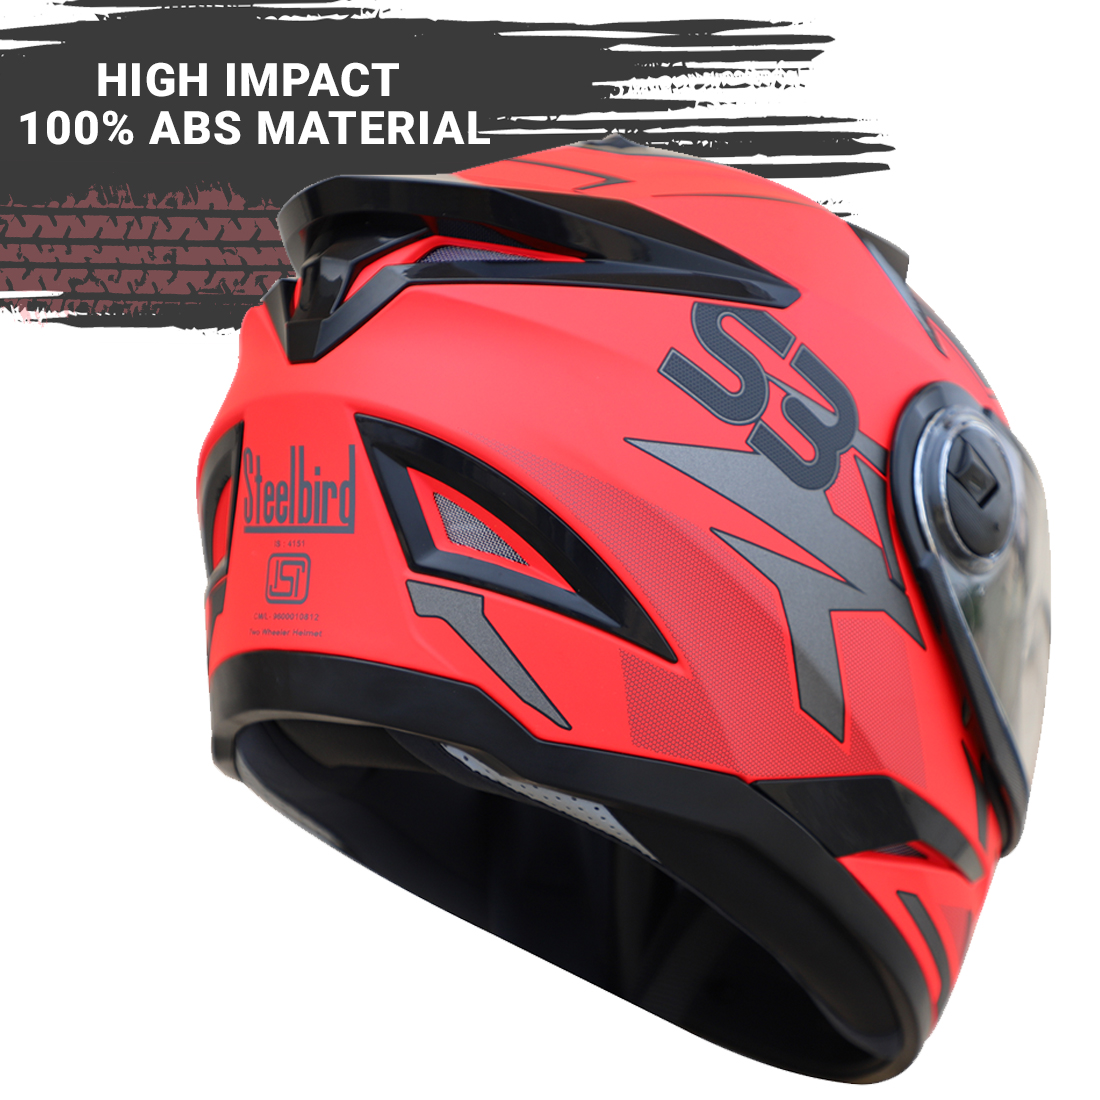 Steelbird SBH-17 Terminator ISI Certified Full Face Graphic Helmet (Glossy Fluo Watermelon Grey With Clear Visor)